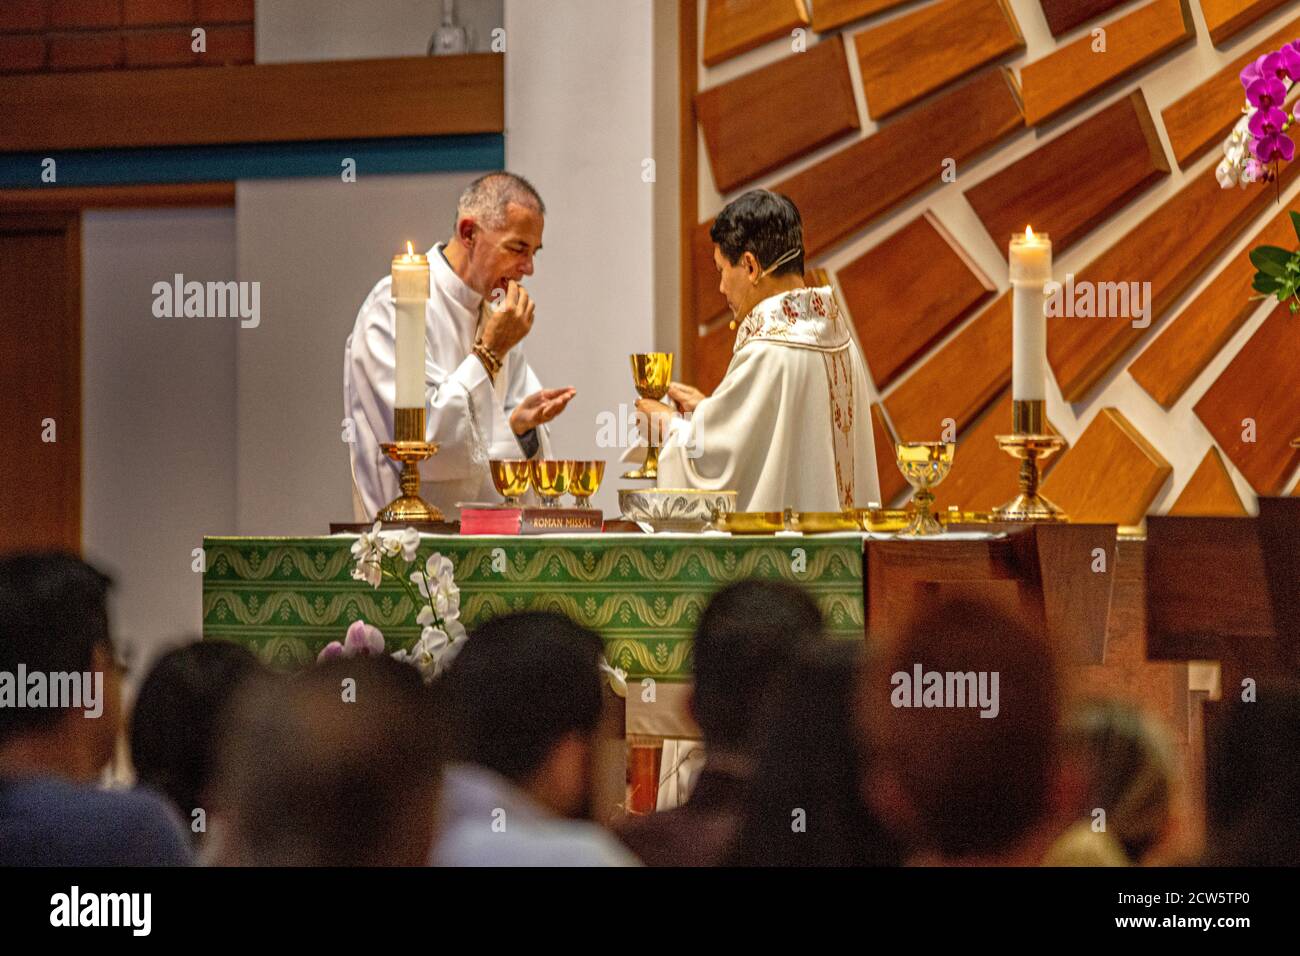 Wearing ceremonial robes, a deacon assists an Asian American priest preparing for communion during mass at the altar of a Southern California Catholic Stock Photo